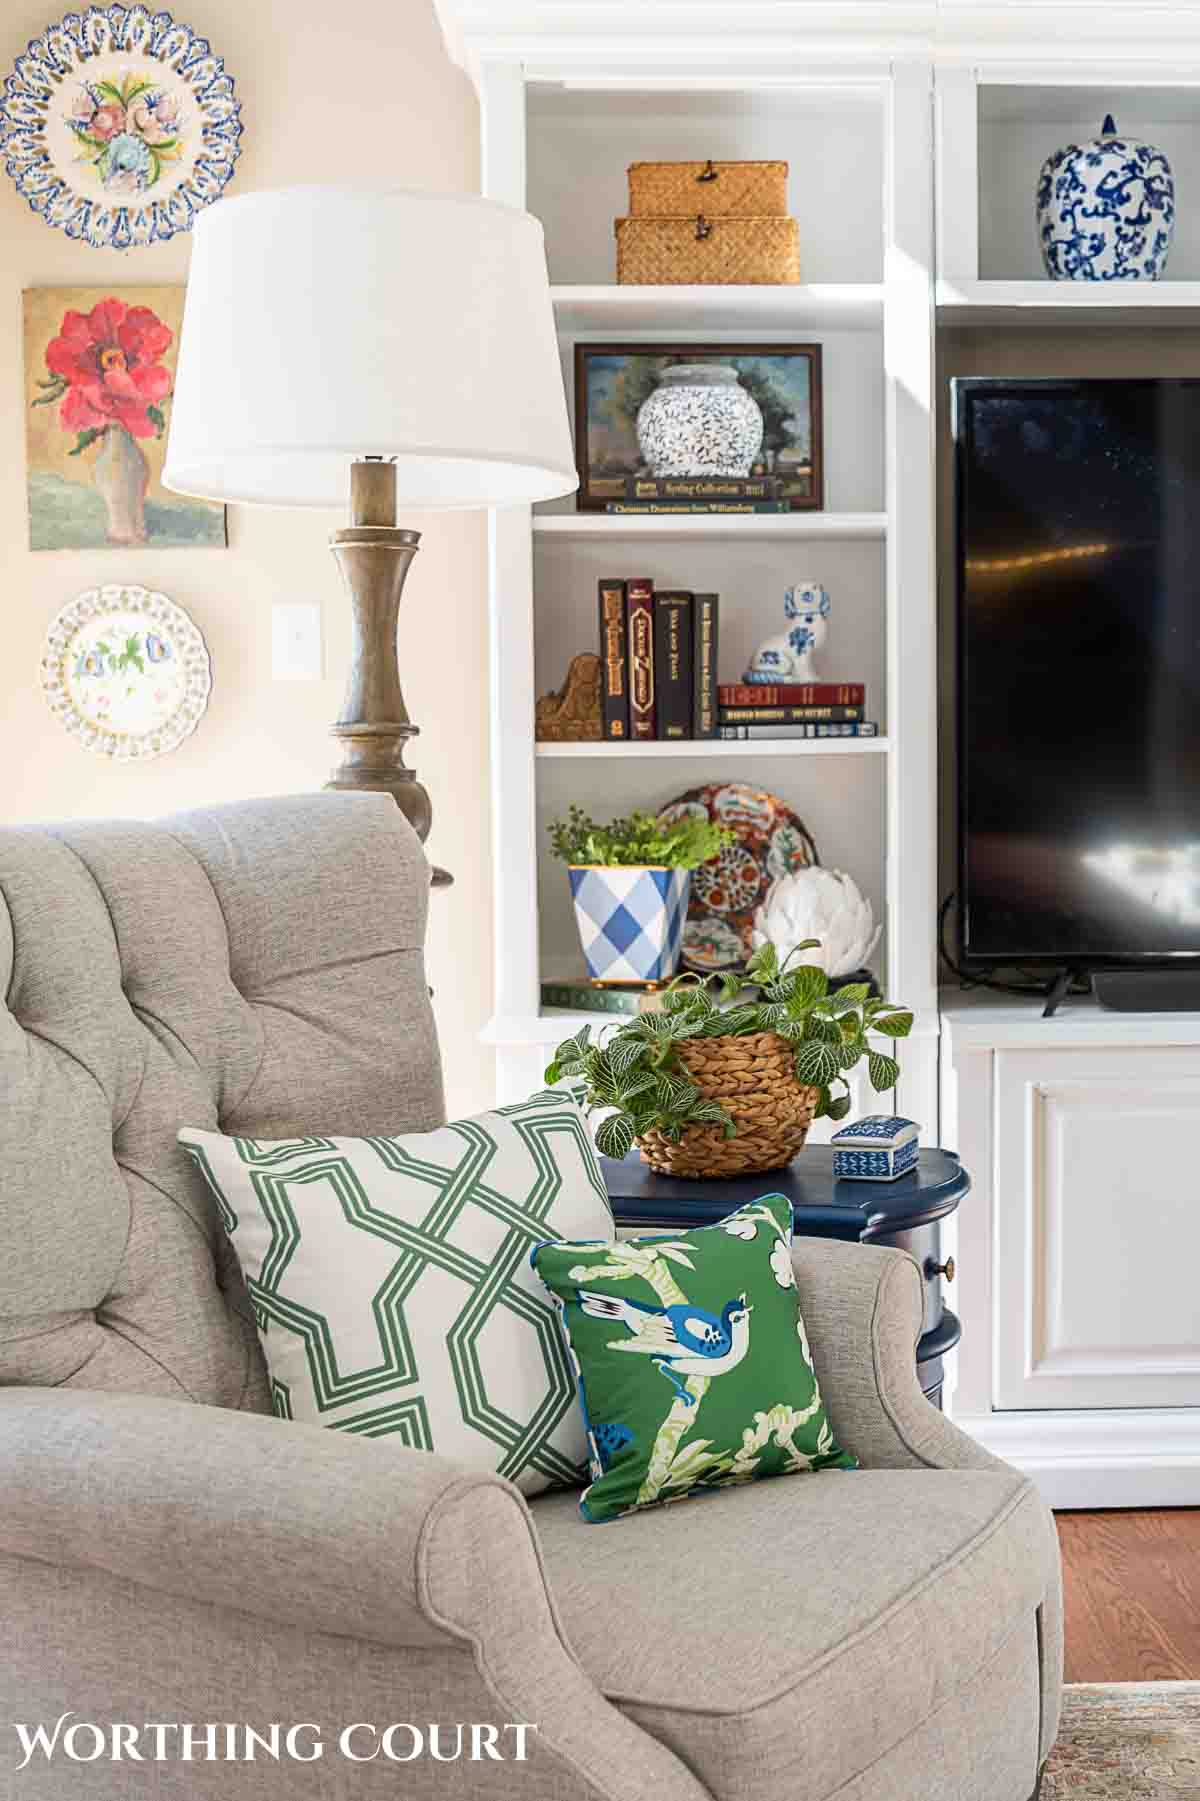 living room entertainment center behind gray arm chair with green pillows